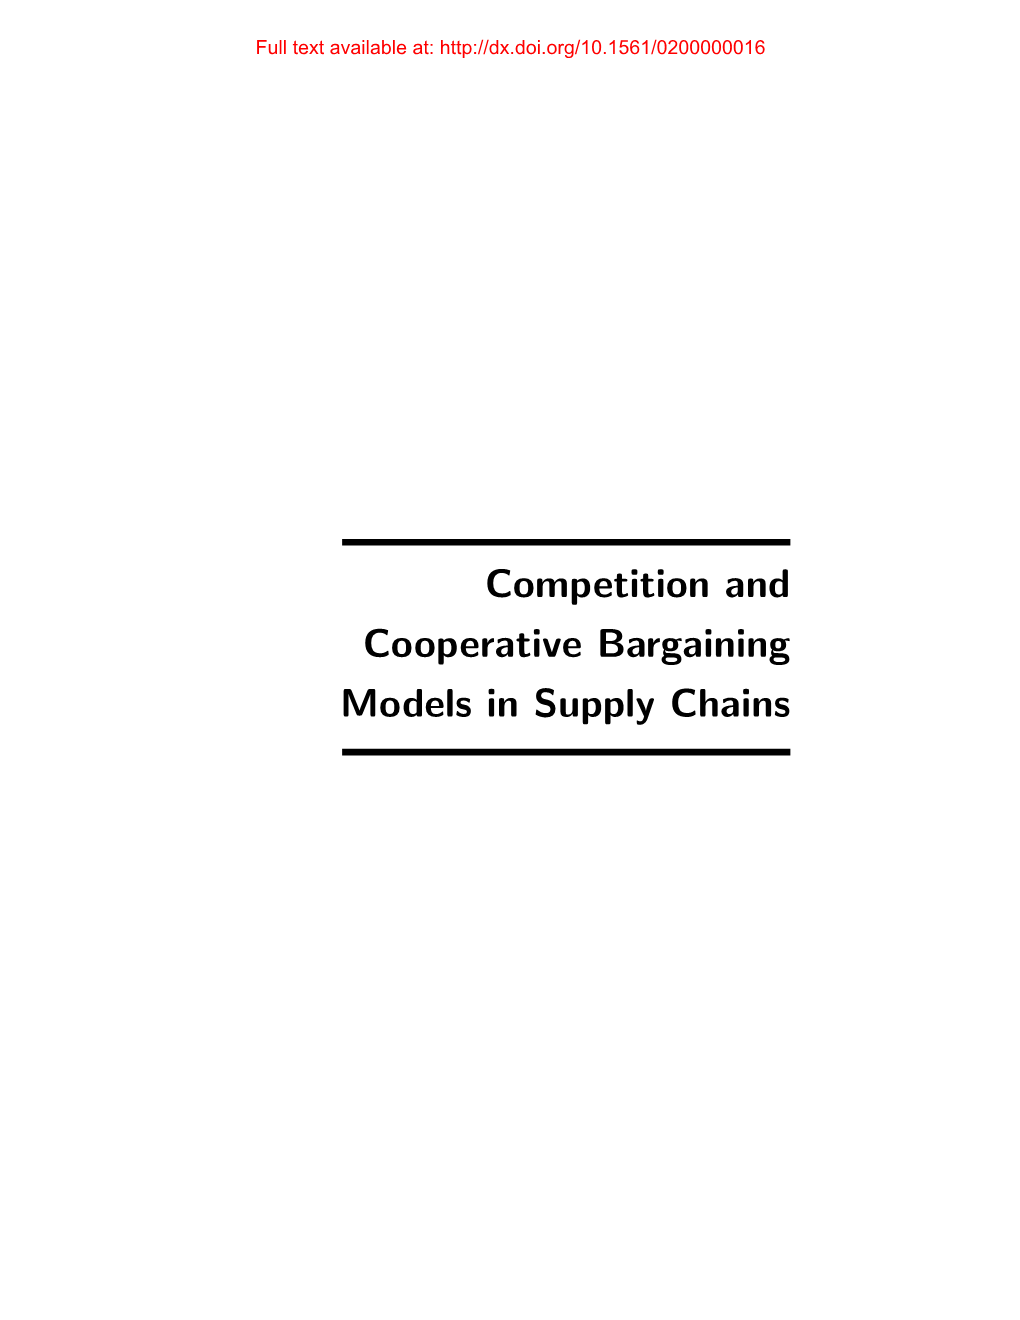 Competition and Cooperative Bargaining Models in Supply Chains Full Text Available At